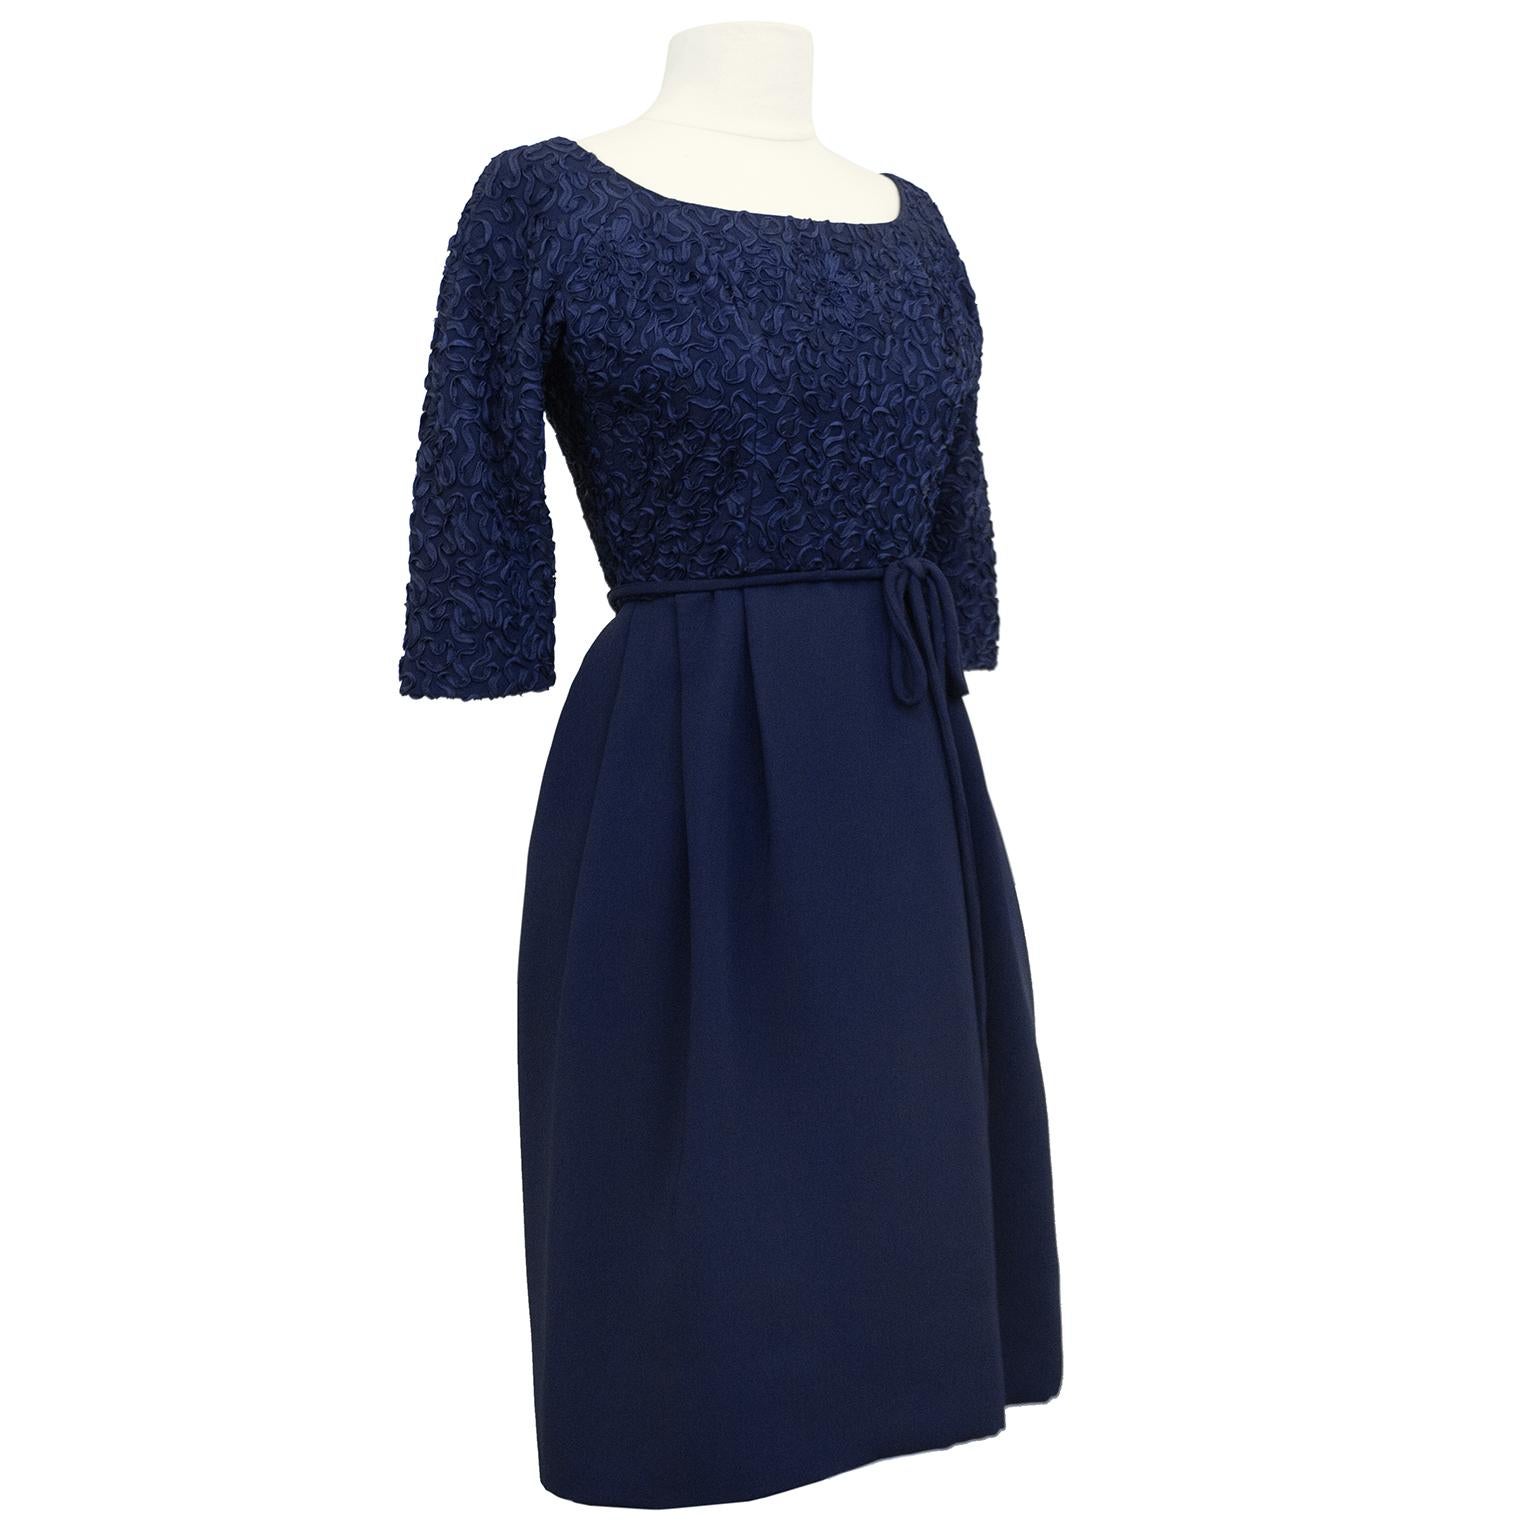 Gorgeous 1950s navy blue cocktail dress. Boat neckline, bracelet length sleeves, fitted bodice and a-line skirt. Bodice is entirely embroidered with monochromatic navy blue ribbon. Thin and delicate waist belt that can be tied in your liking. Tulle